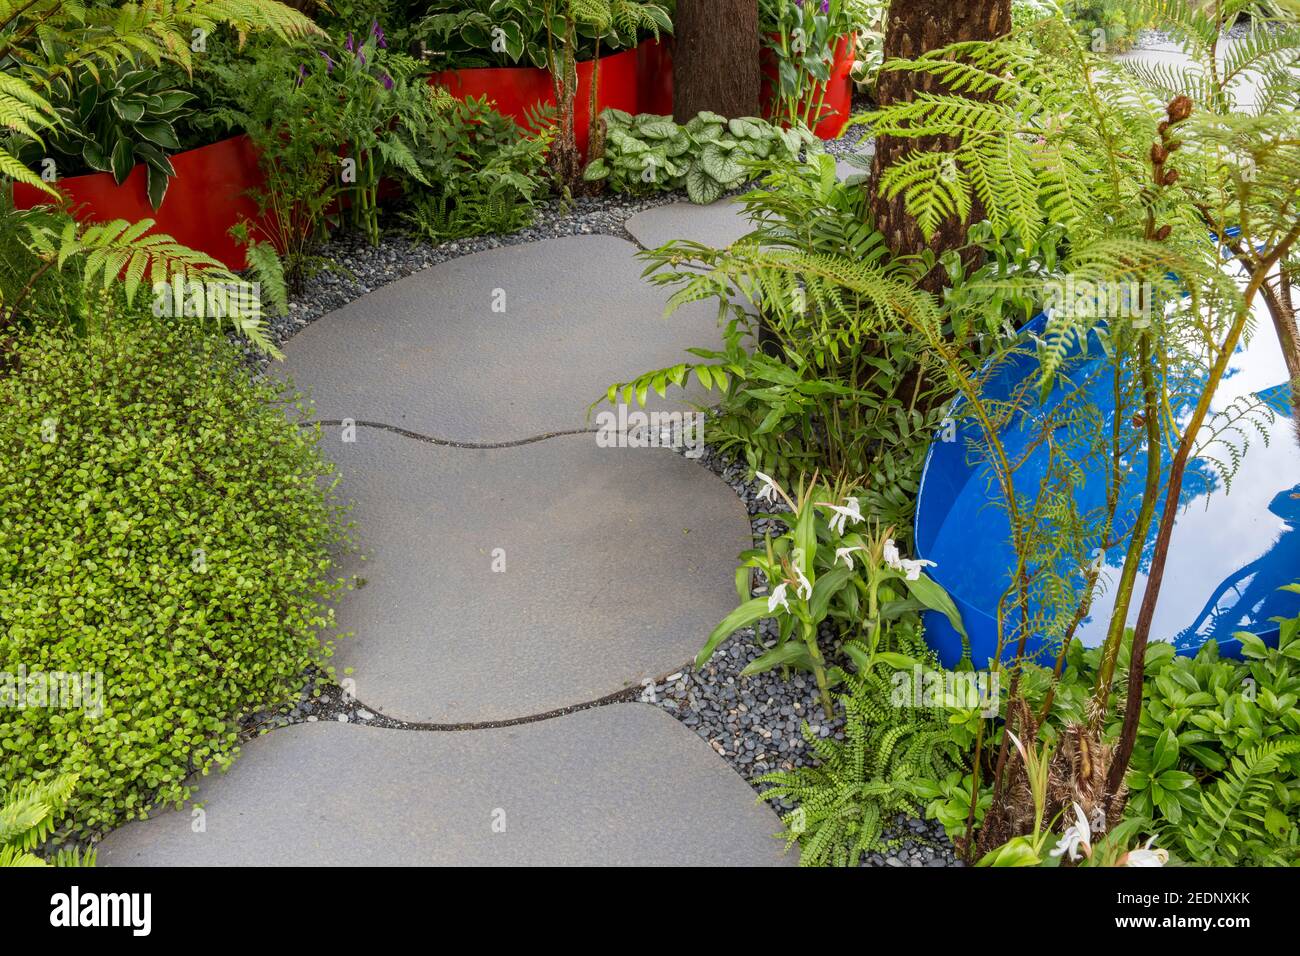 A modern stone paving paved garden path with a water feature with a green evergreen garden border ferns Hampton Court Flower Show London England UK Stock Photo